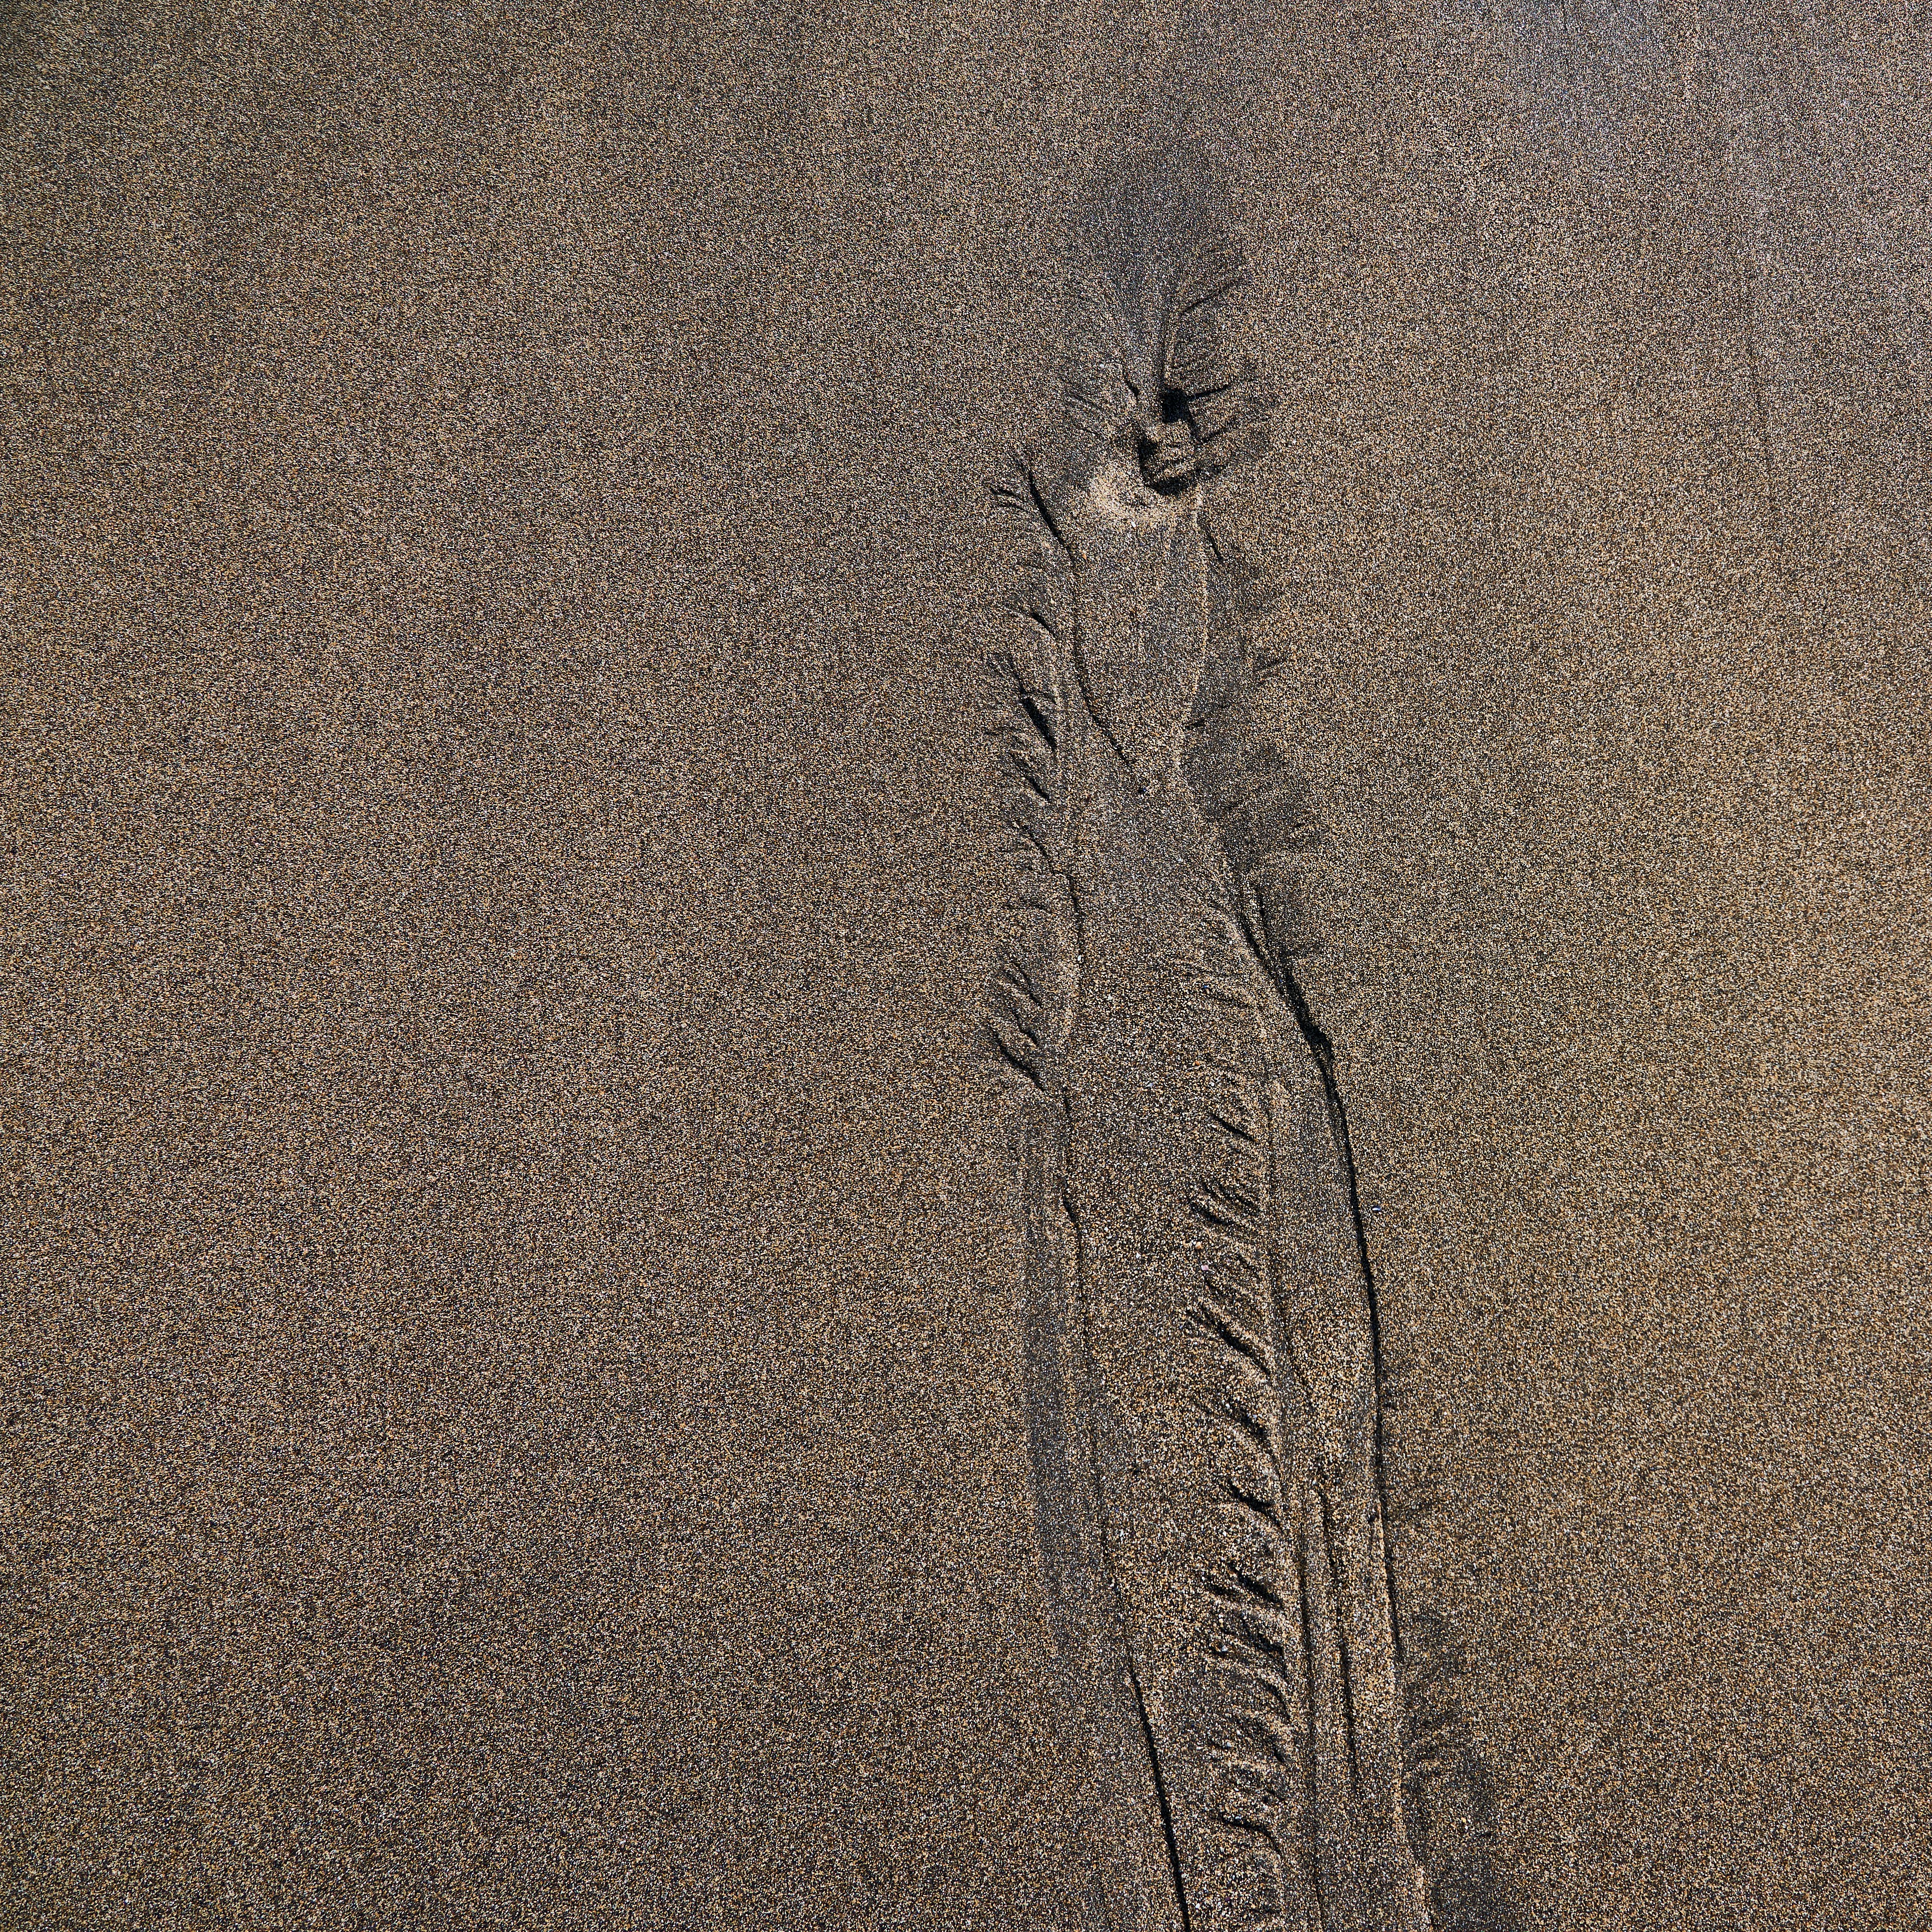 Abstract creatures on black sand beach, the Snaefellnes peninsula, Iceland